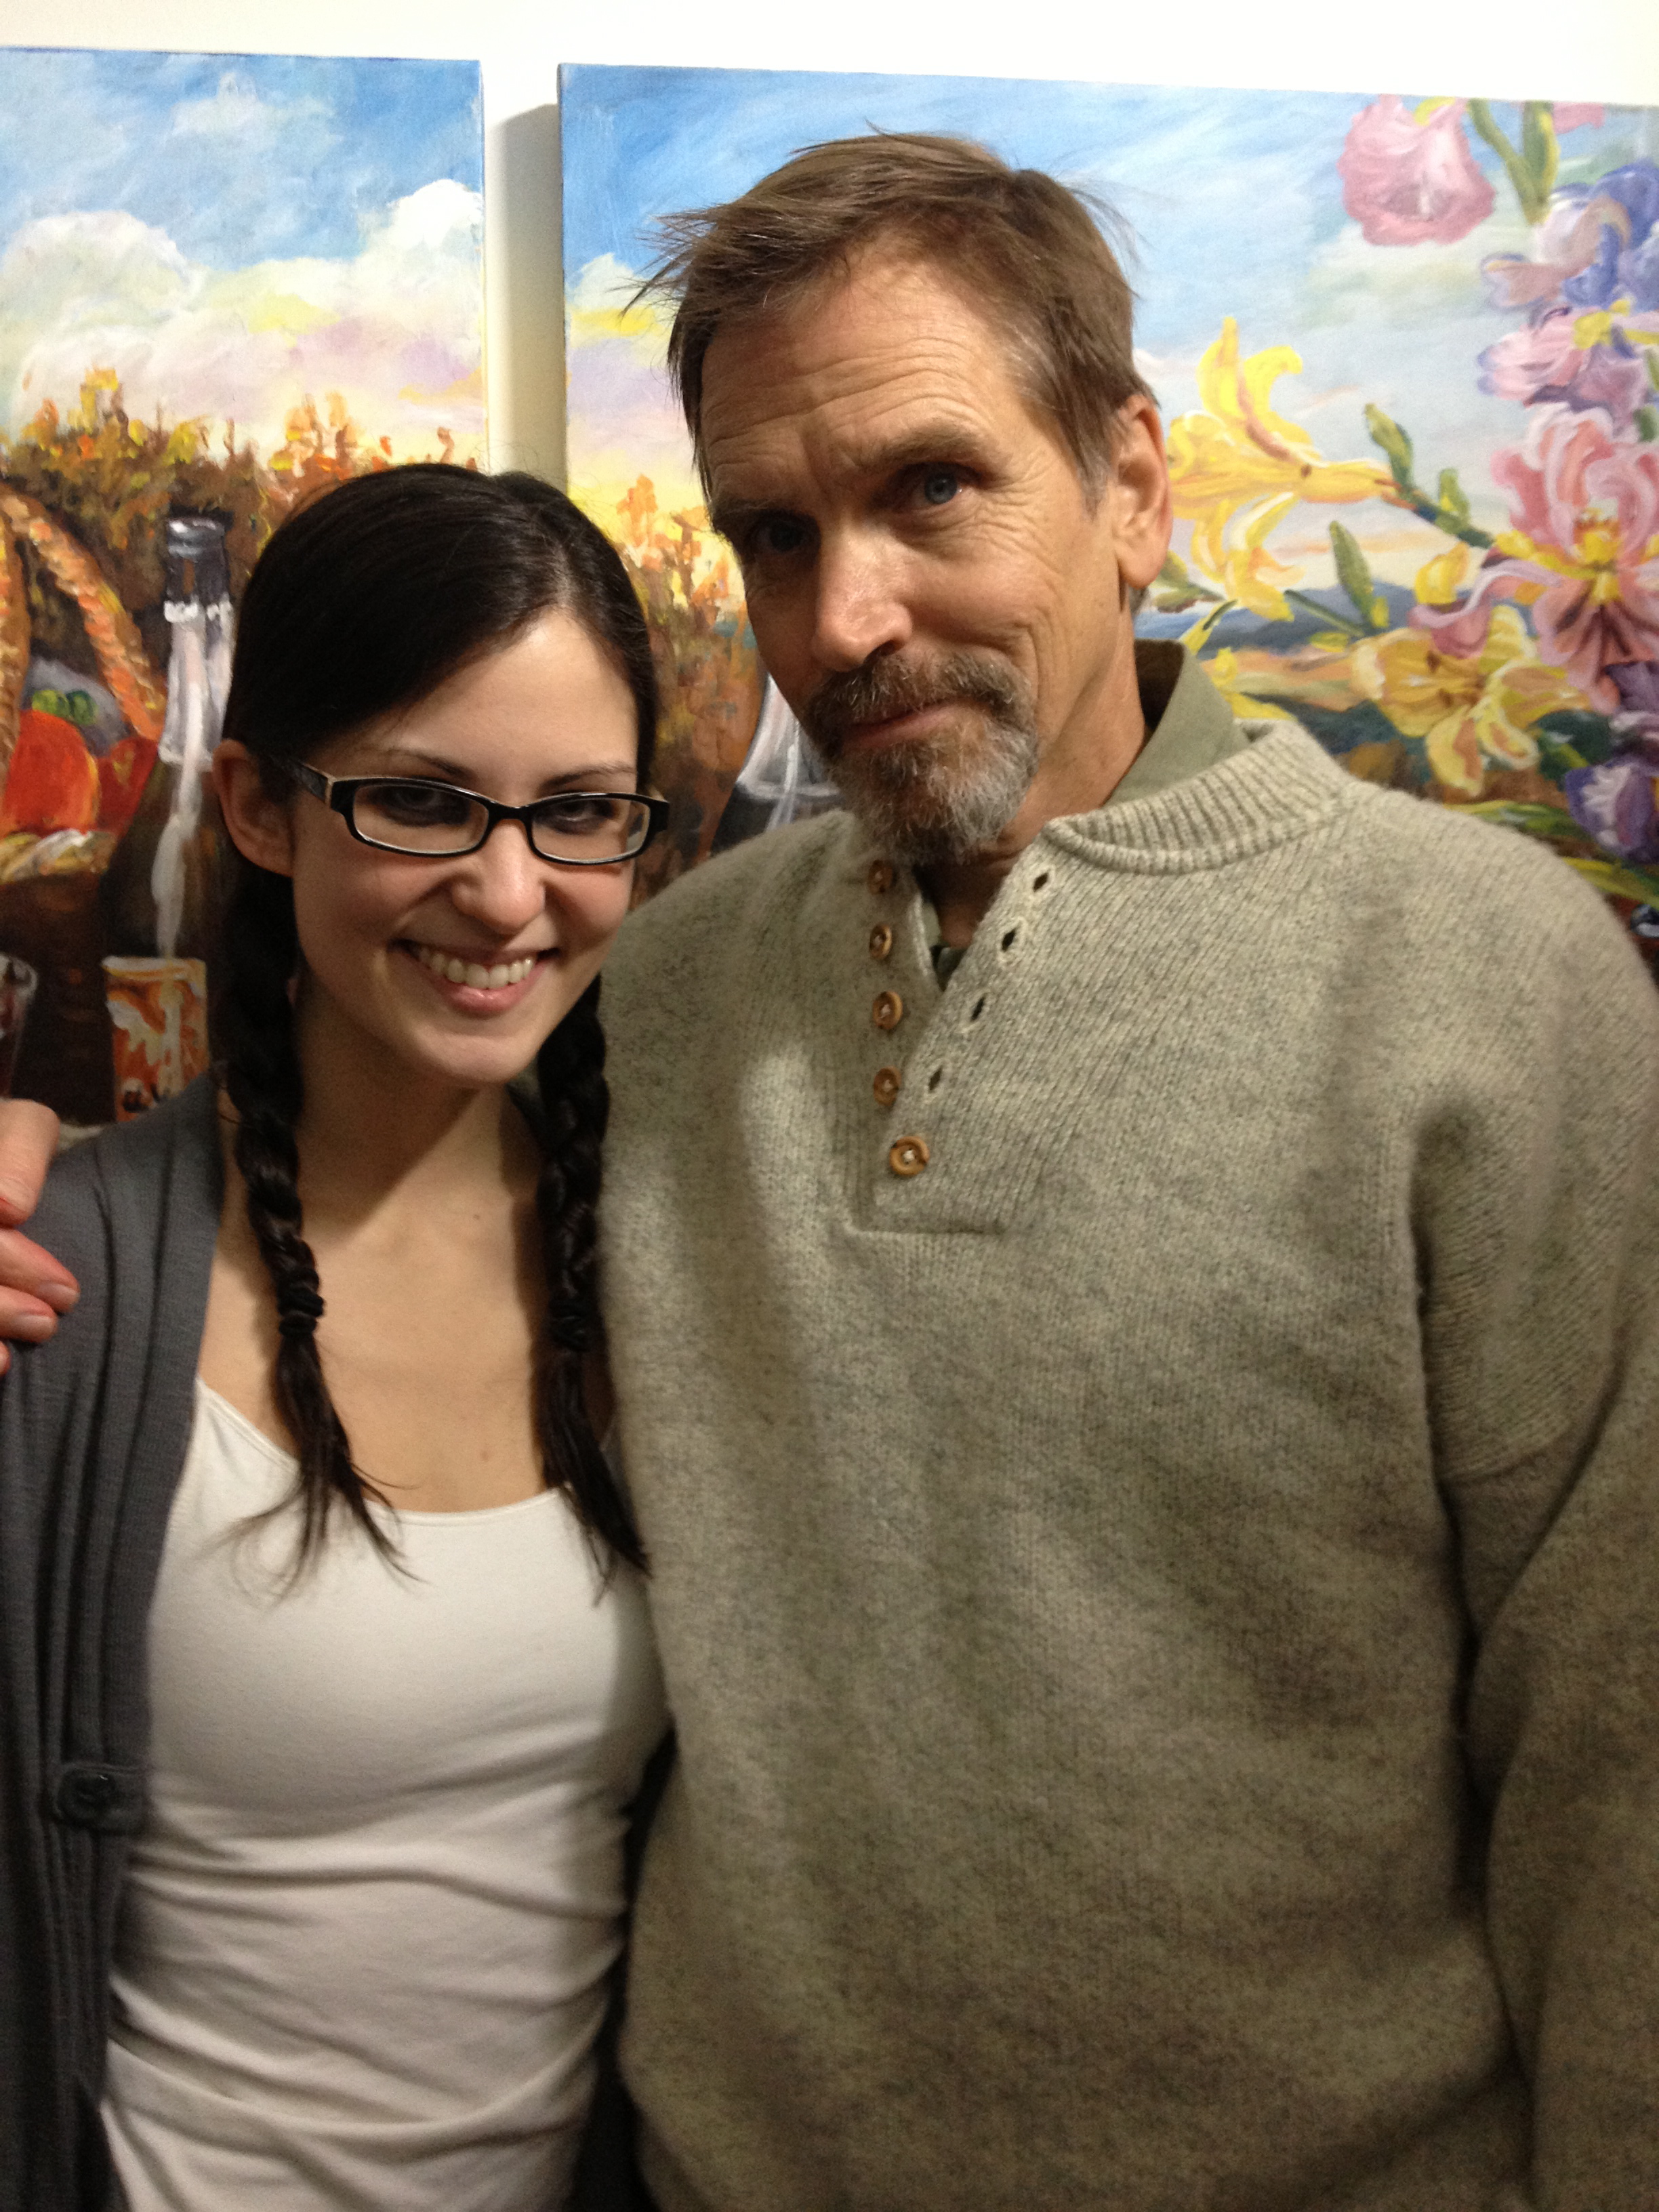 On set with Bill Moseley